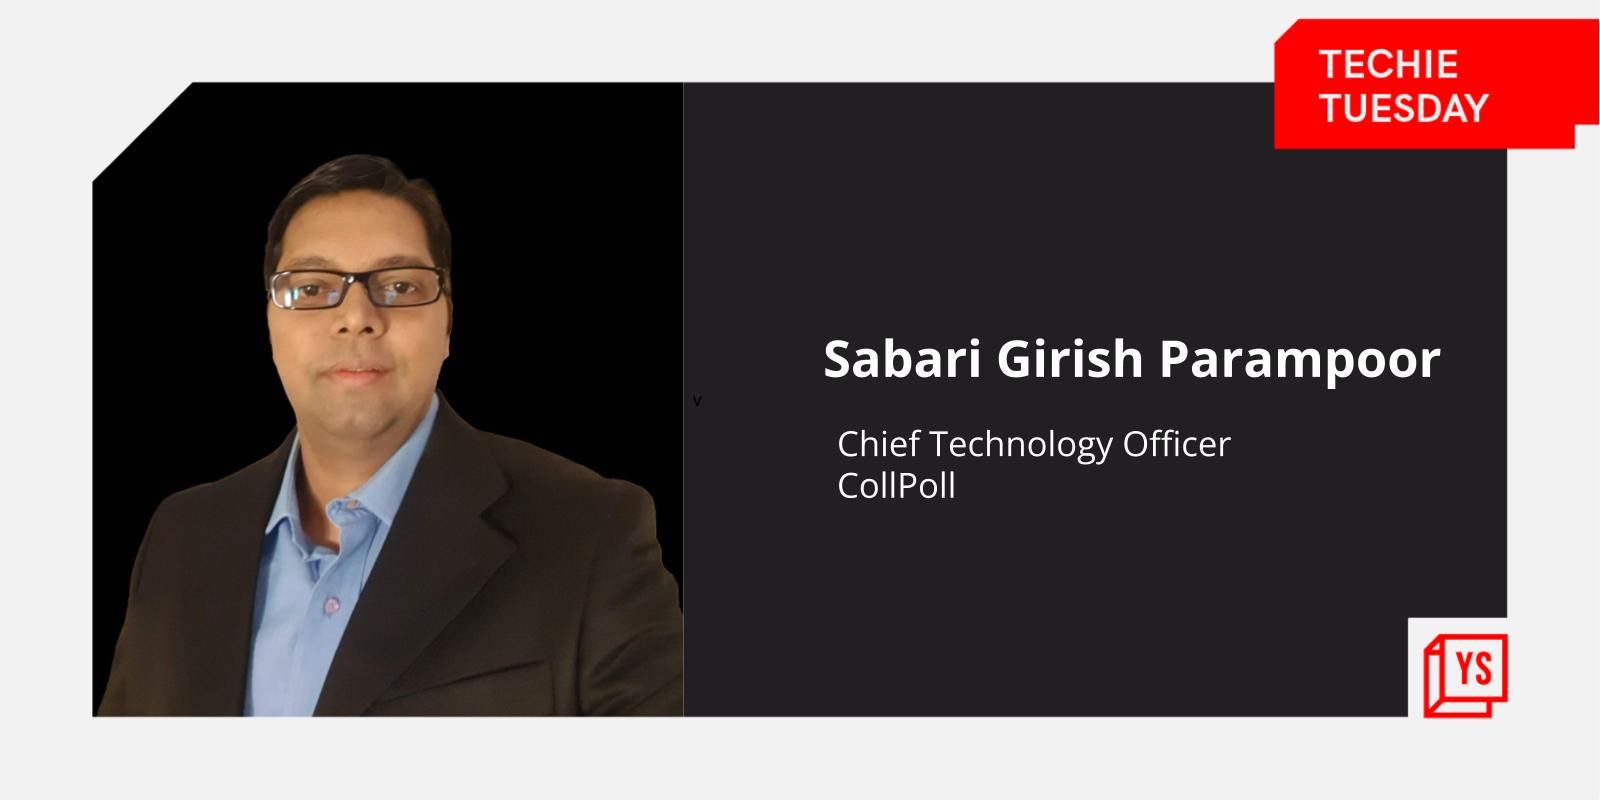 [Techie Tuesday] From building systems at VMWare to creating a B2B edtech platform for colleges, meet Coll Poll’s Sabari Girish Parampoor